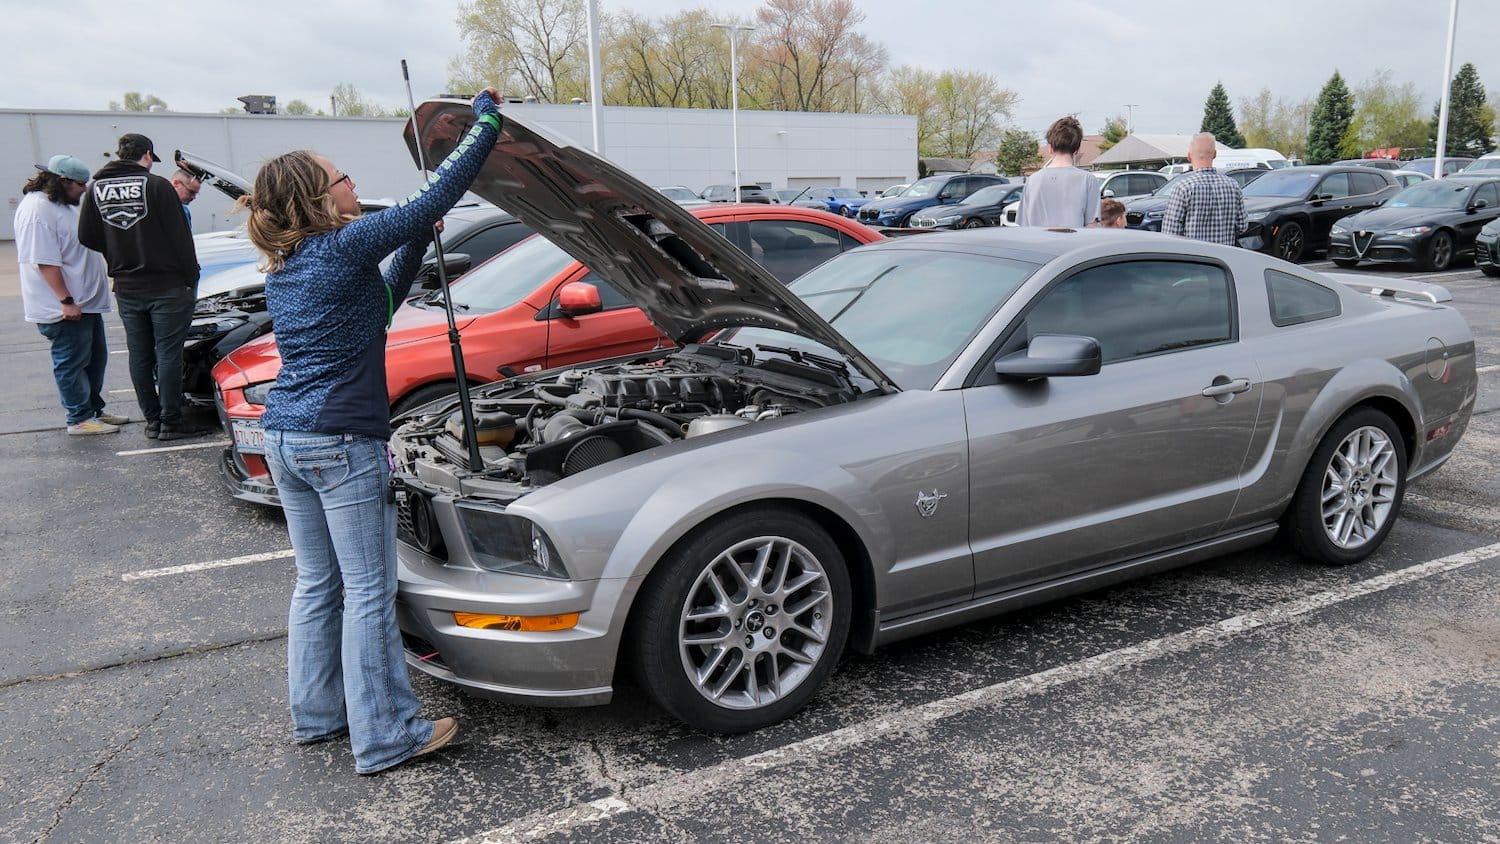 Propping the hood on the Mustang.